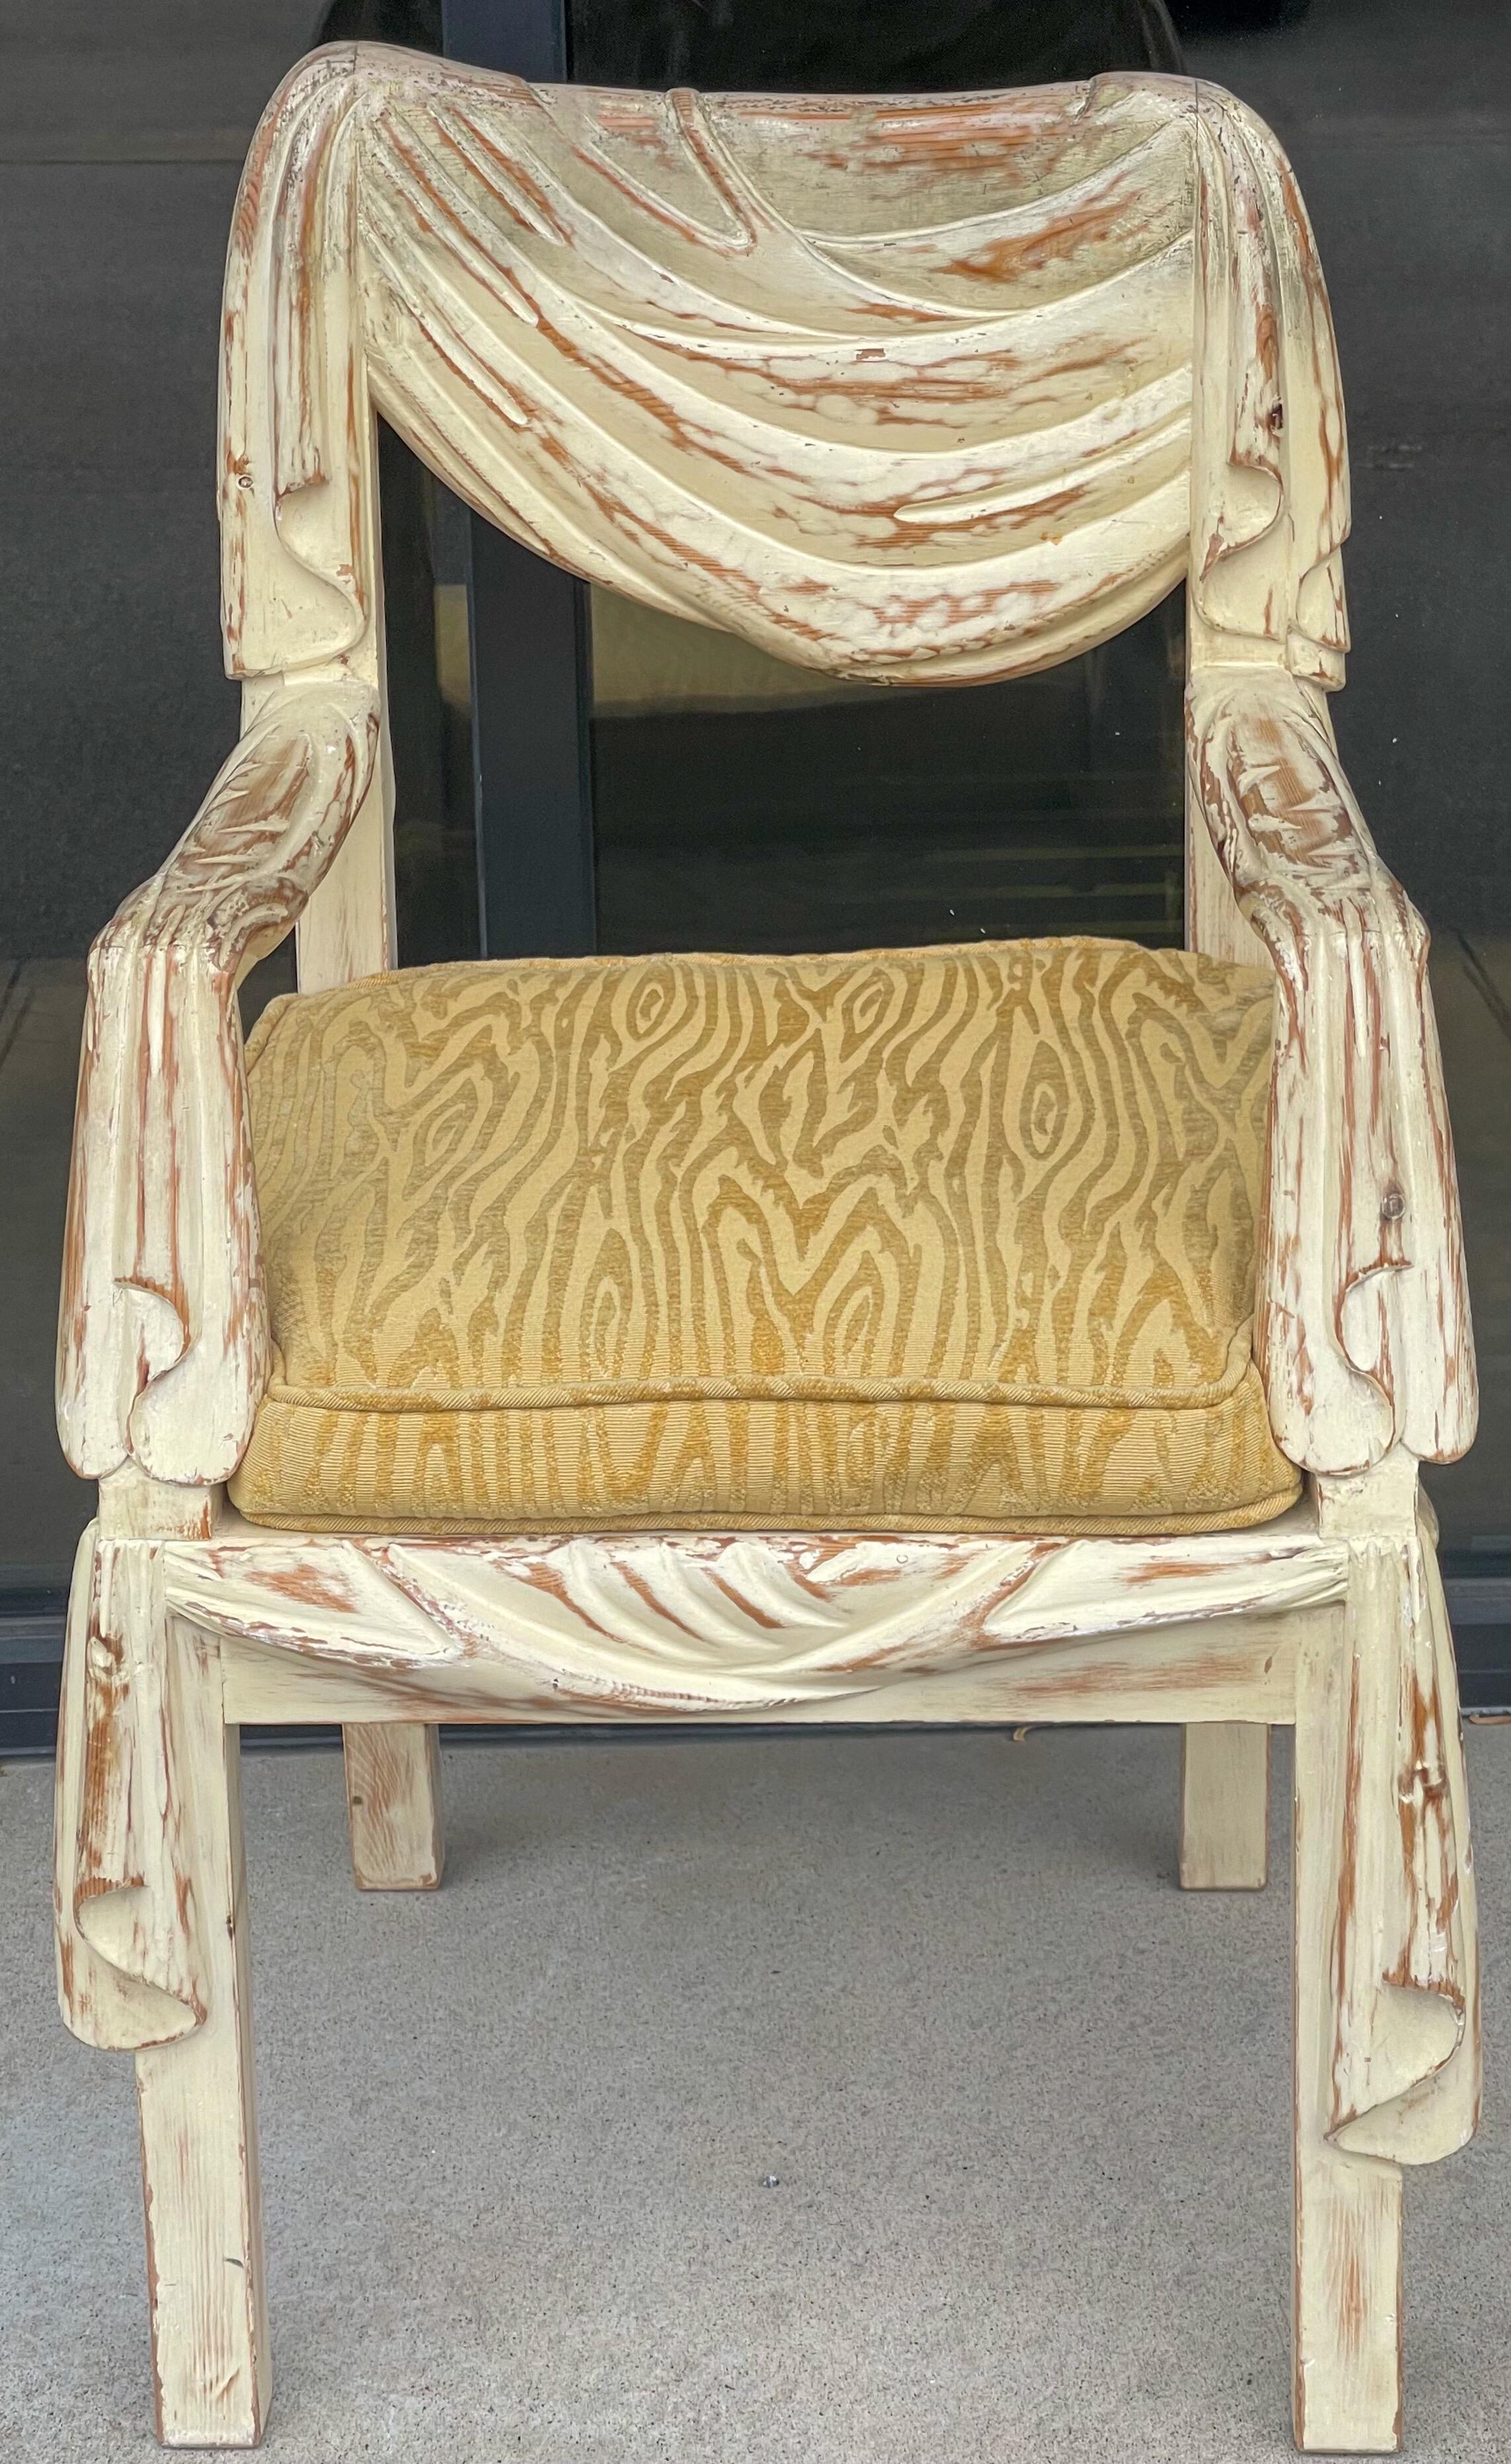 This is a statement piece! This is a carved and cerused arm chair by Chapman and hand crafted in Spain. It has a faux drape and carved form that combines some faux bois elsmsnts. I do have a side chair as well if interested. The upholstery is